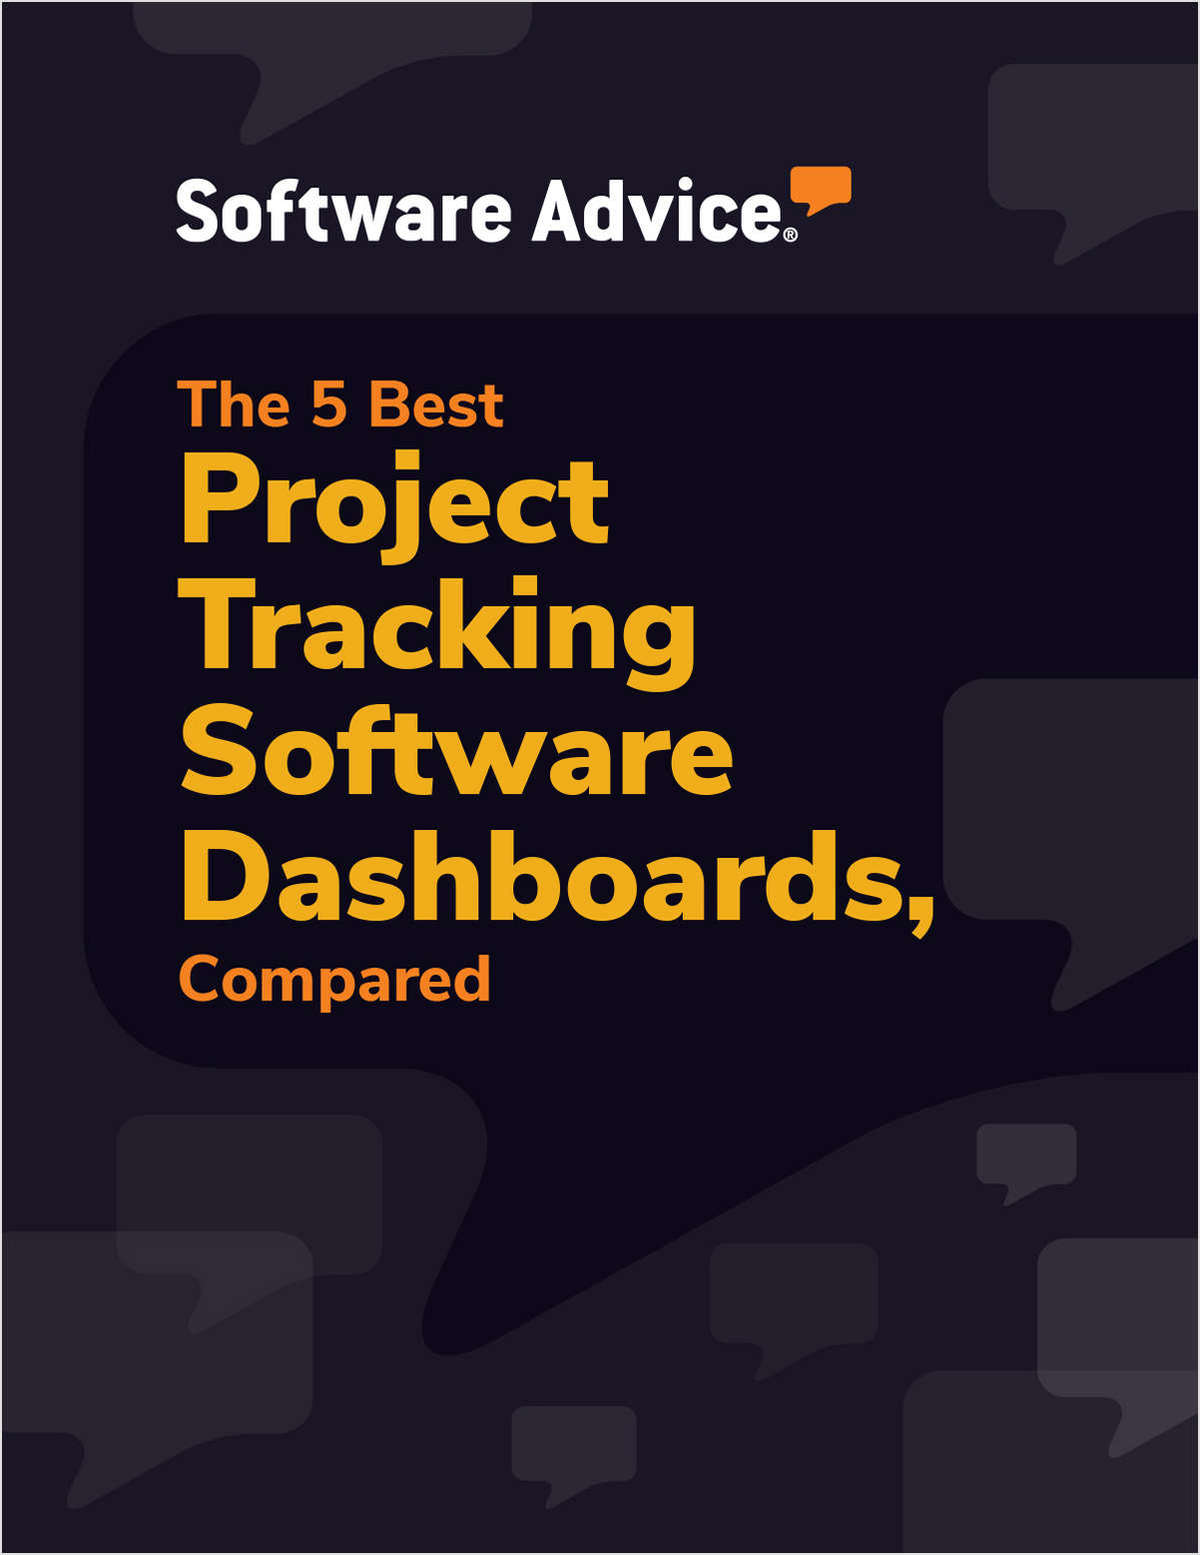 The 5 Best Project Tracking Software Dashboards, Compared